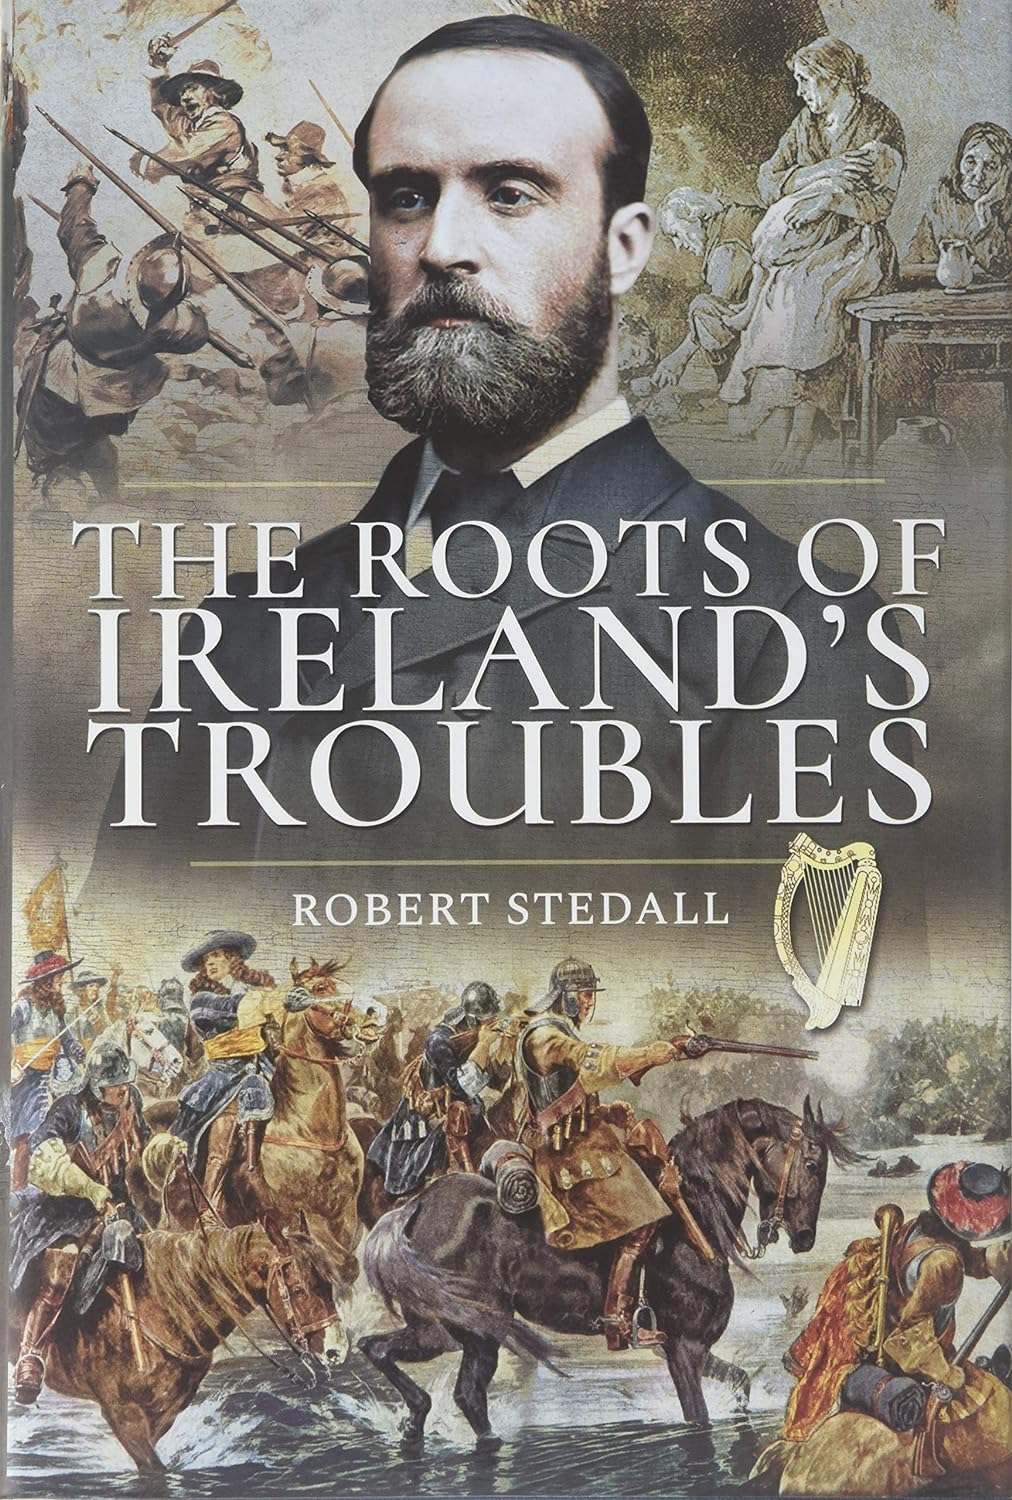 The Roots of Ireland's Troubles, by Robert Stedall